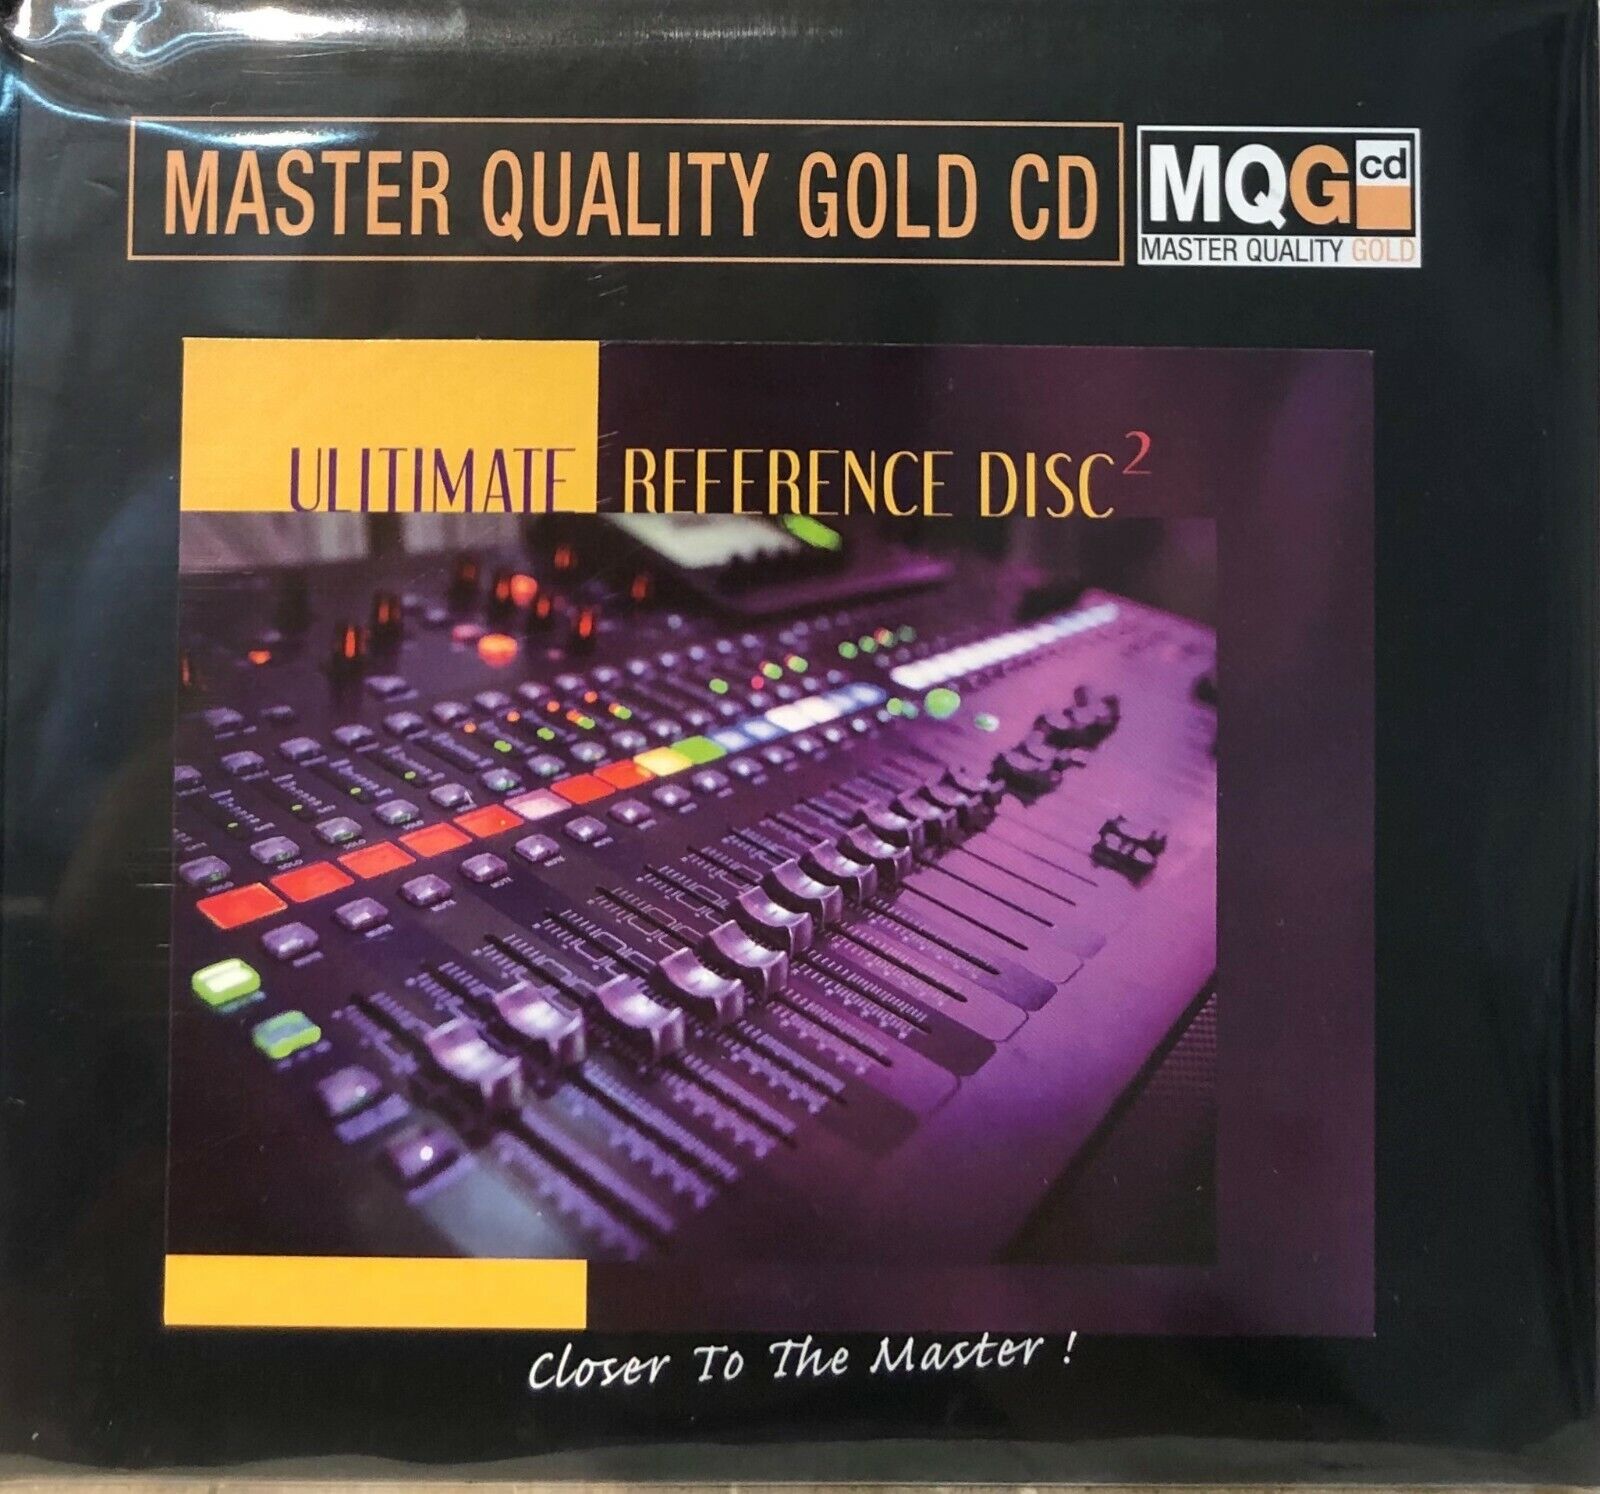 ULTIMATE REFERENCE DISC 2 - VARIOUS ARTISTS master quality (MQGCD) CD